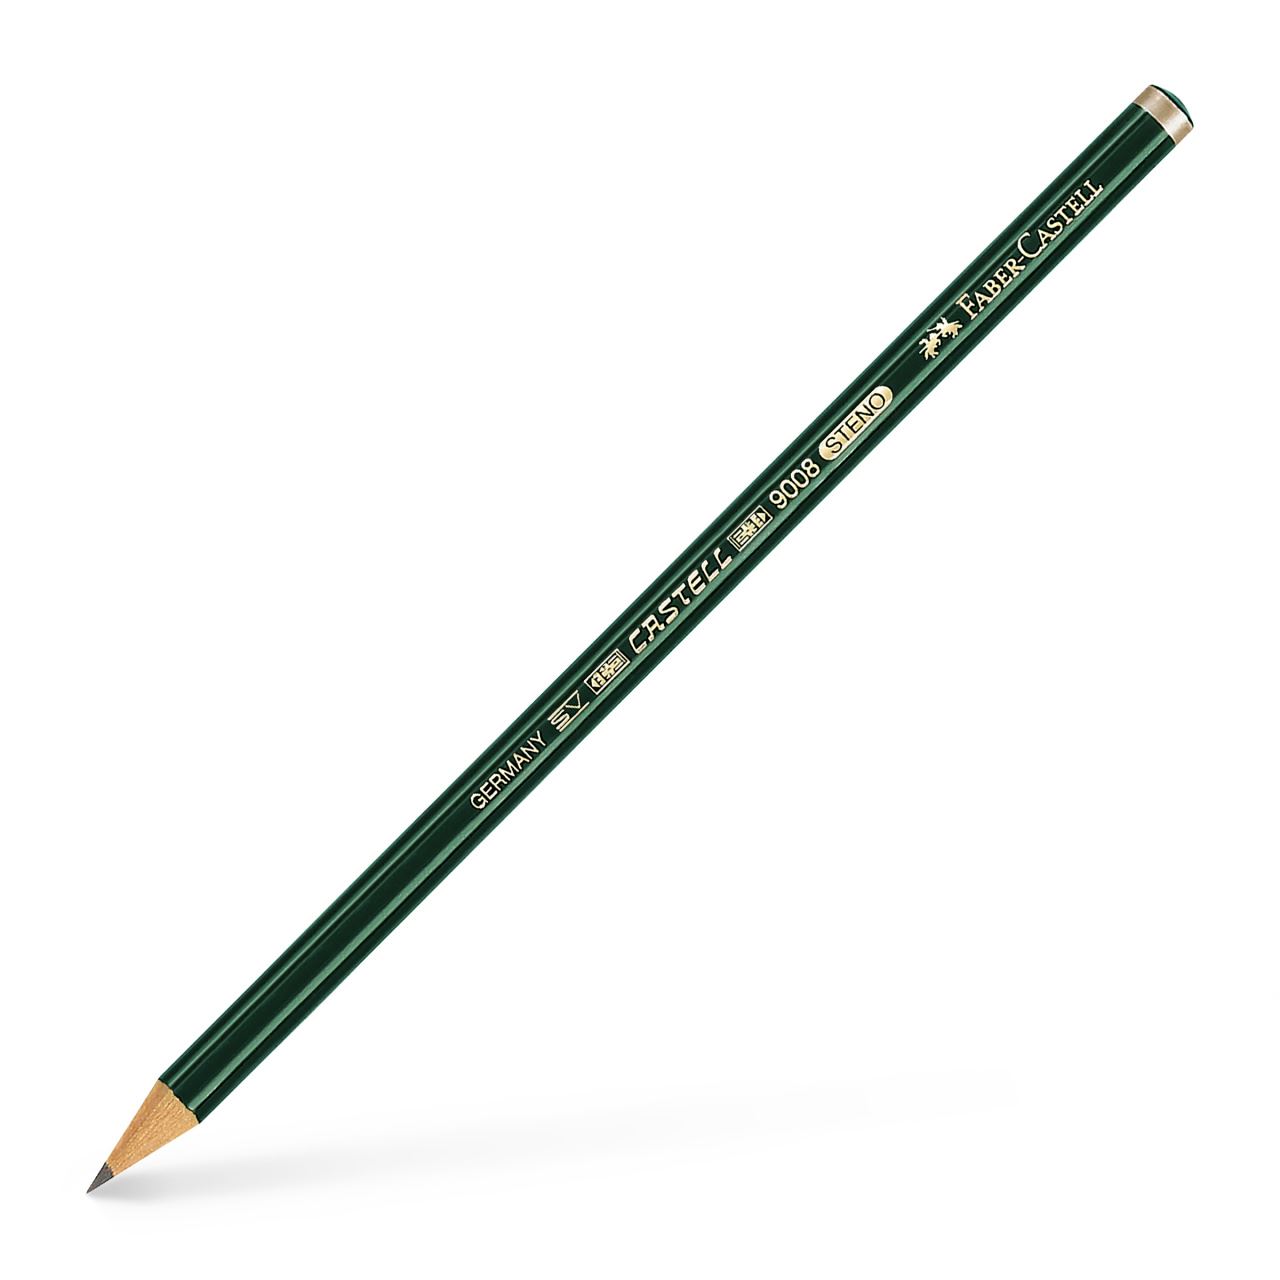 Faber-Castell - Castell stenography 9008 pencil, B